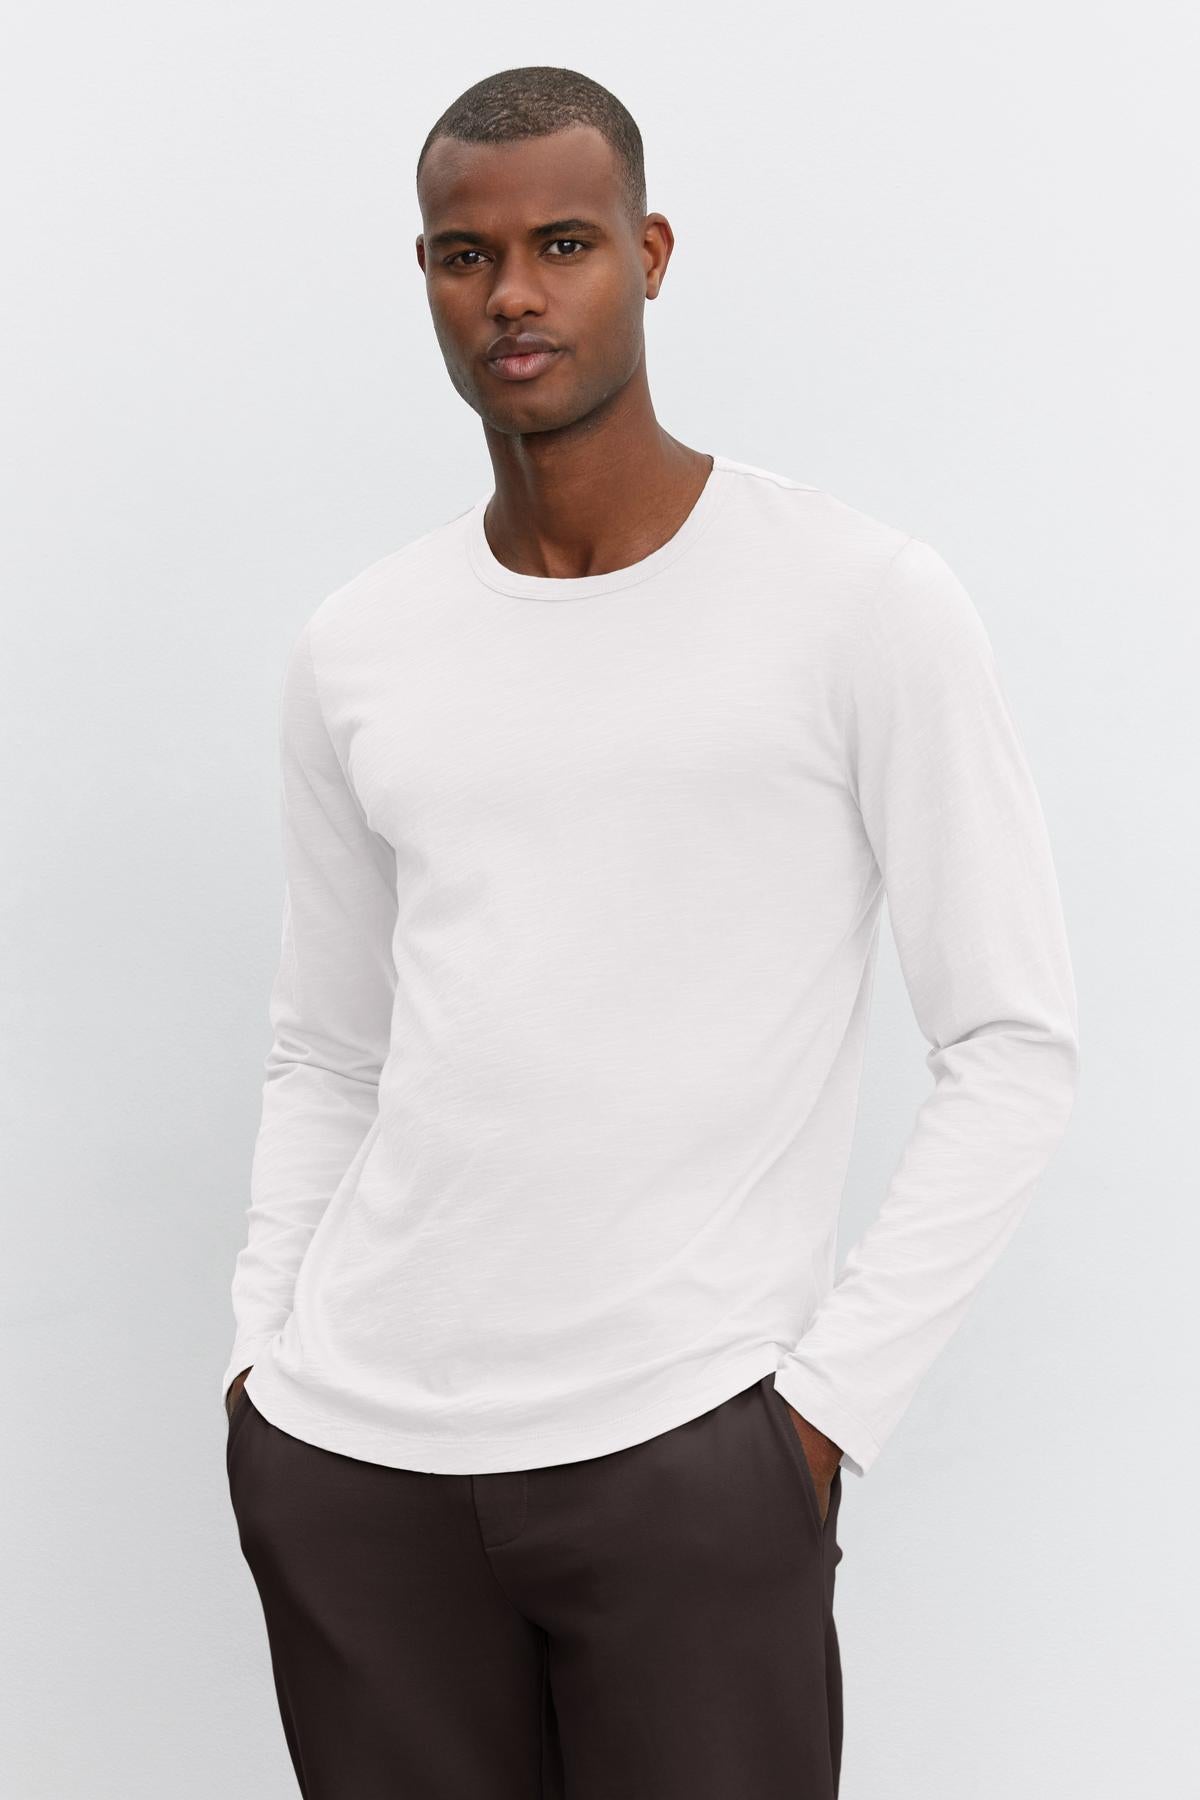 A man in a Velvet by Graham & Spencer KAI CREW NECK TEE and dark trousers stands against a light gray background, looking directly at the camera.-36544896925889